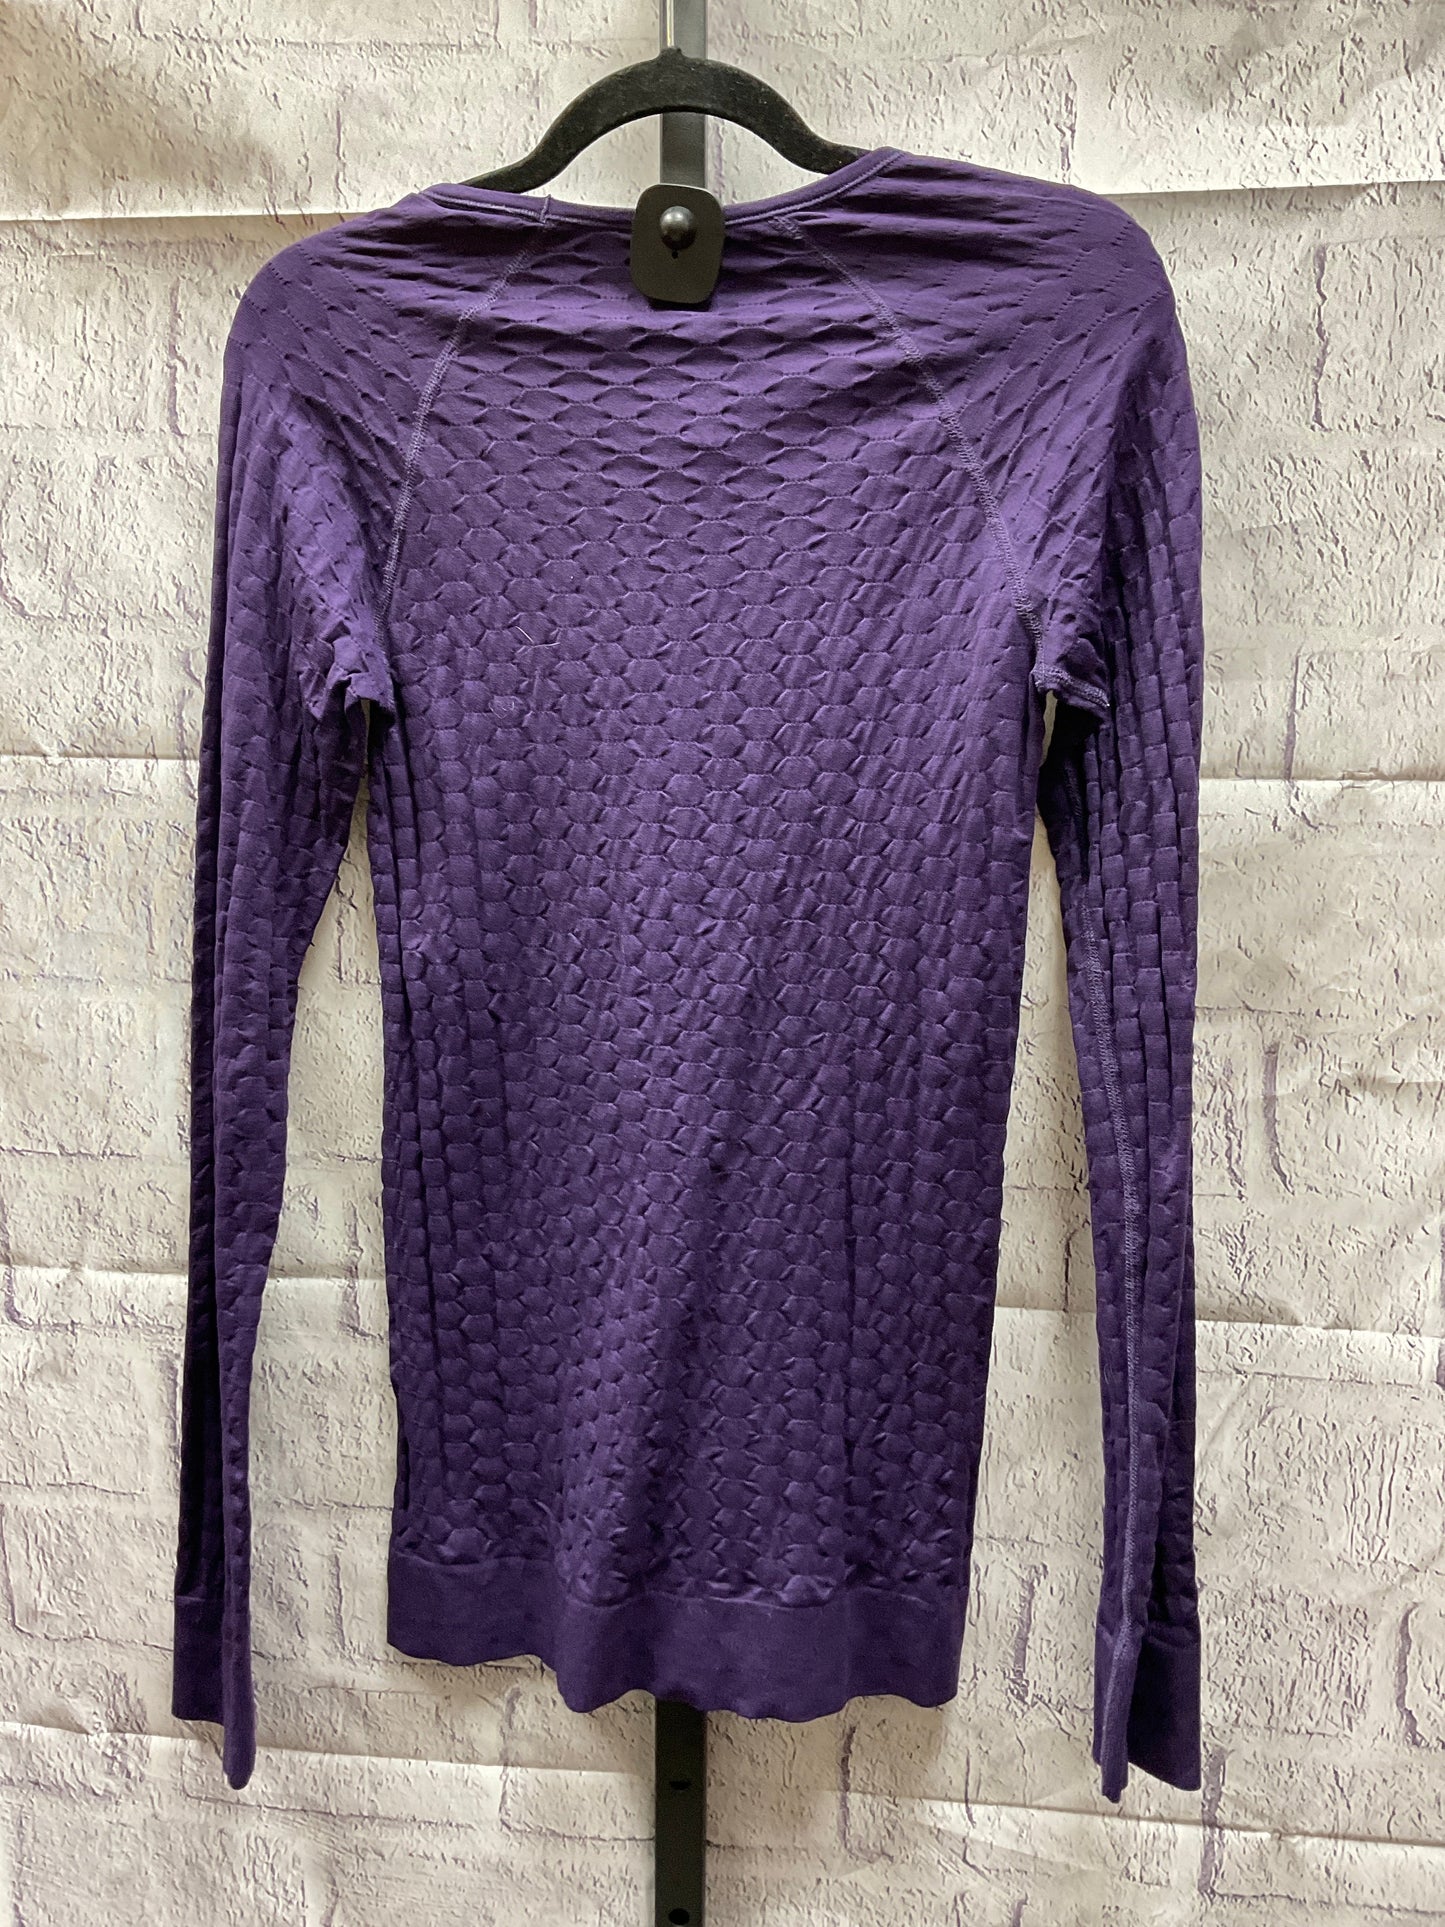 Athletic Top Long Sleeve Collar By Athleta  Size: M